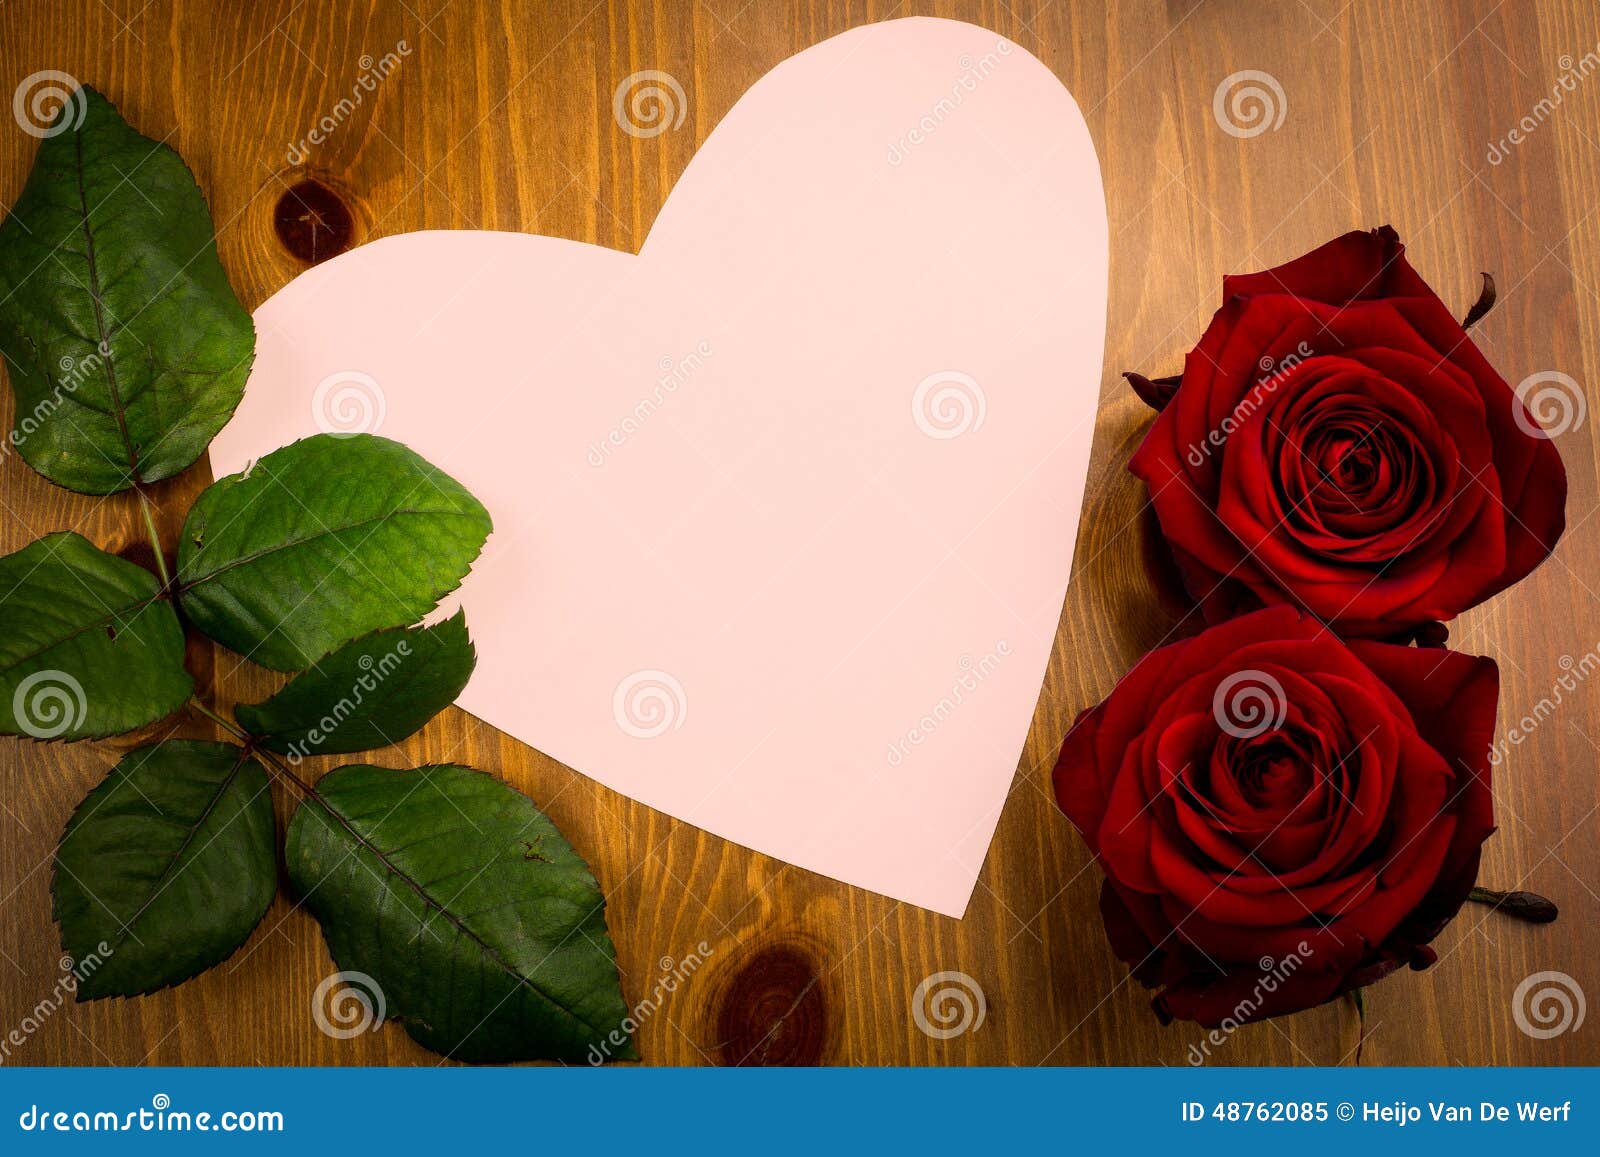 Pink Heart Shaped Note with Leaf and Rose Stock Image - Image of love ...